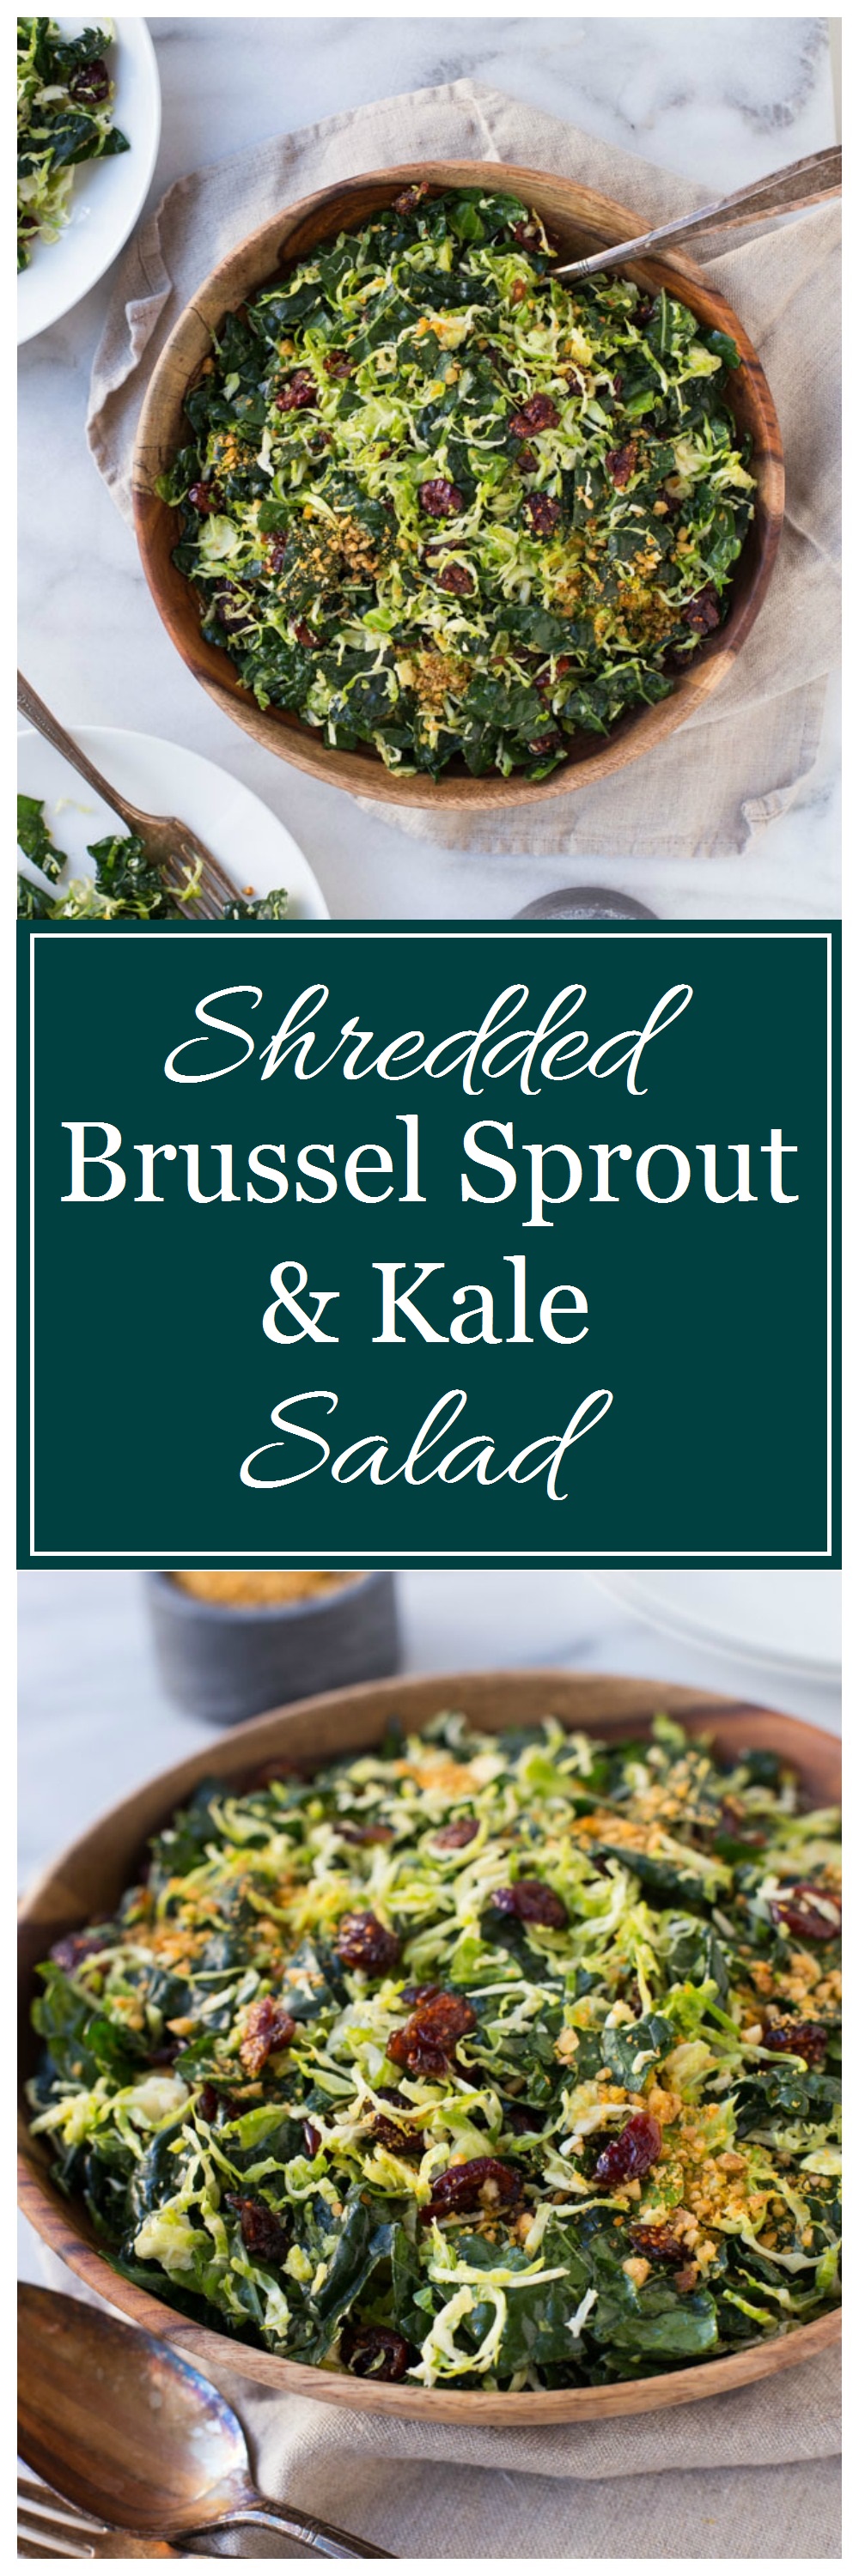 Shredded Brussel Sprout and Kale Salad 180